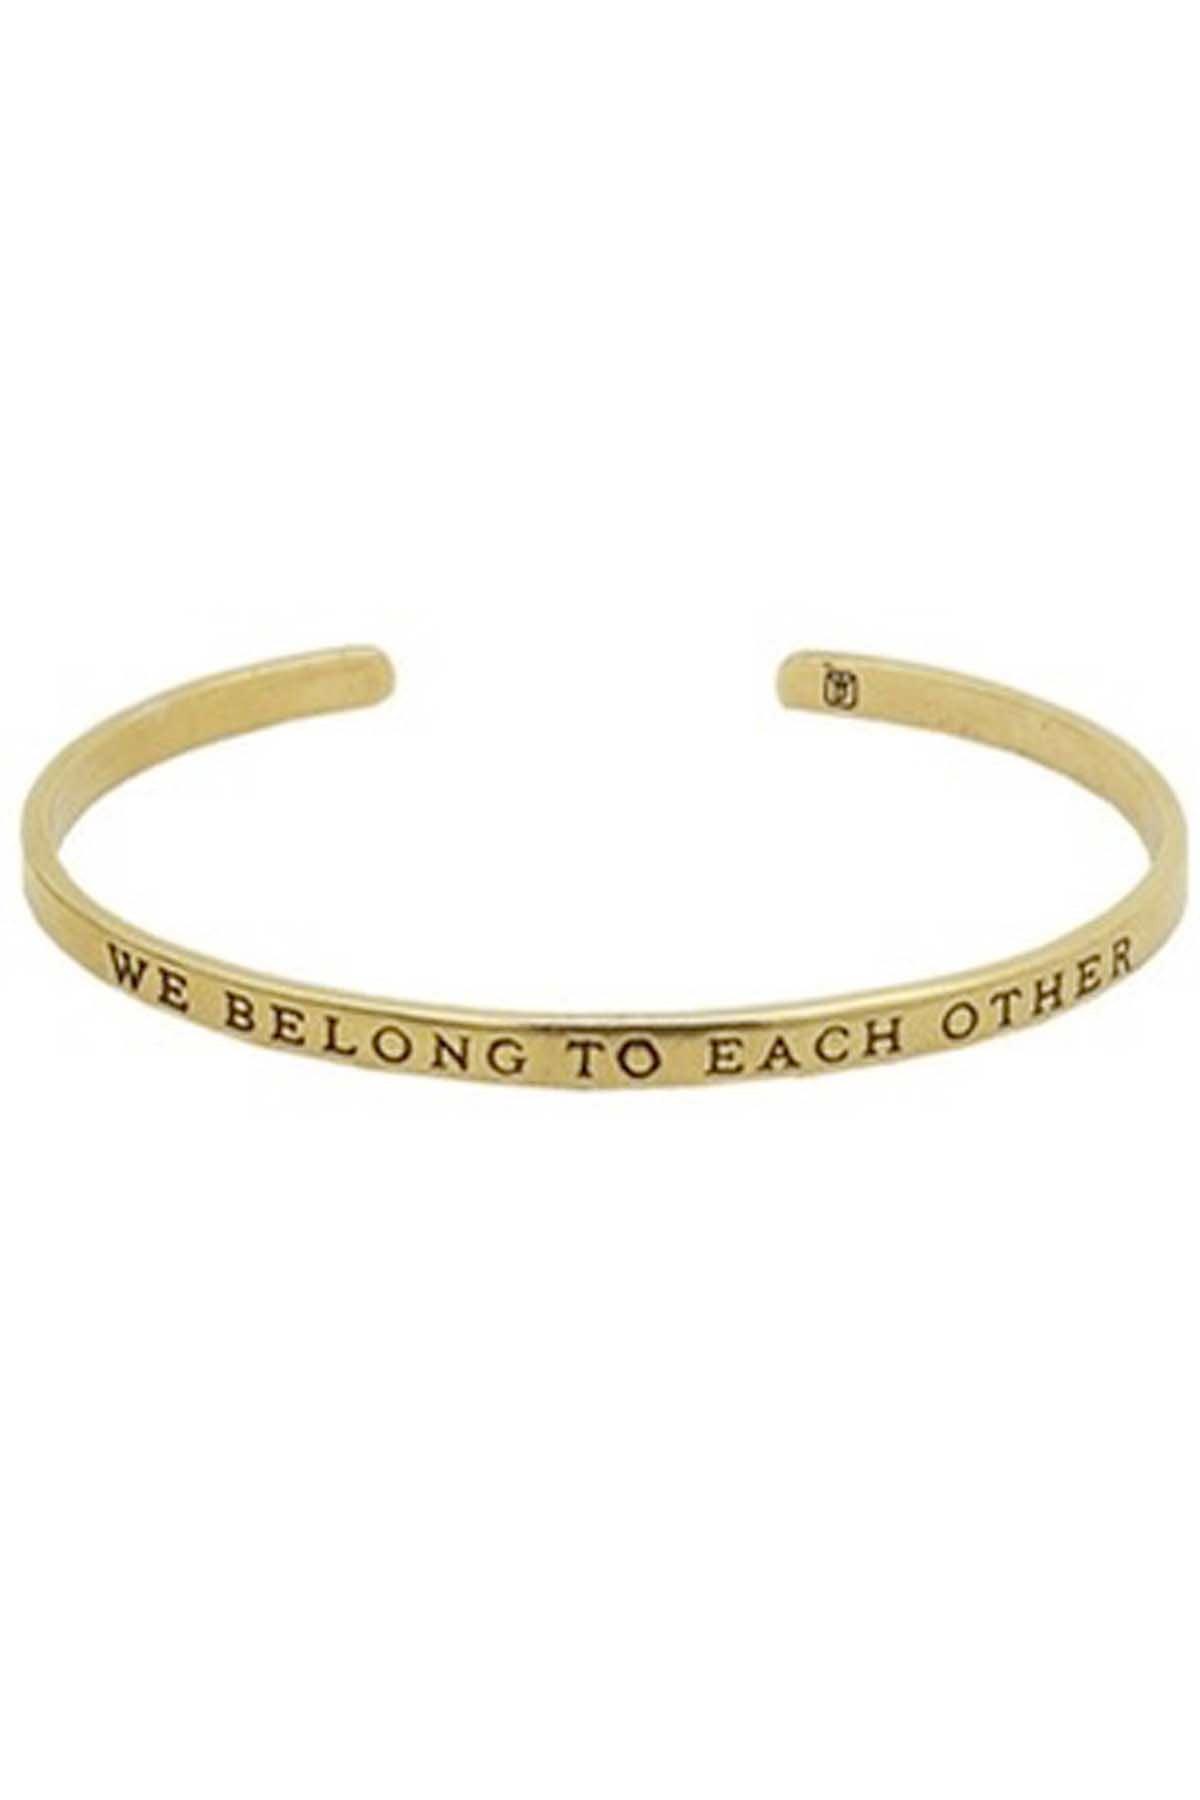 brass cuff with We Belong To Each Other